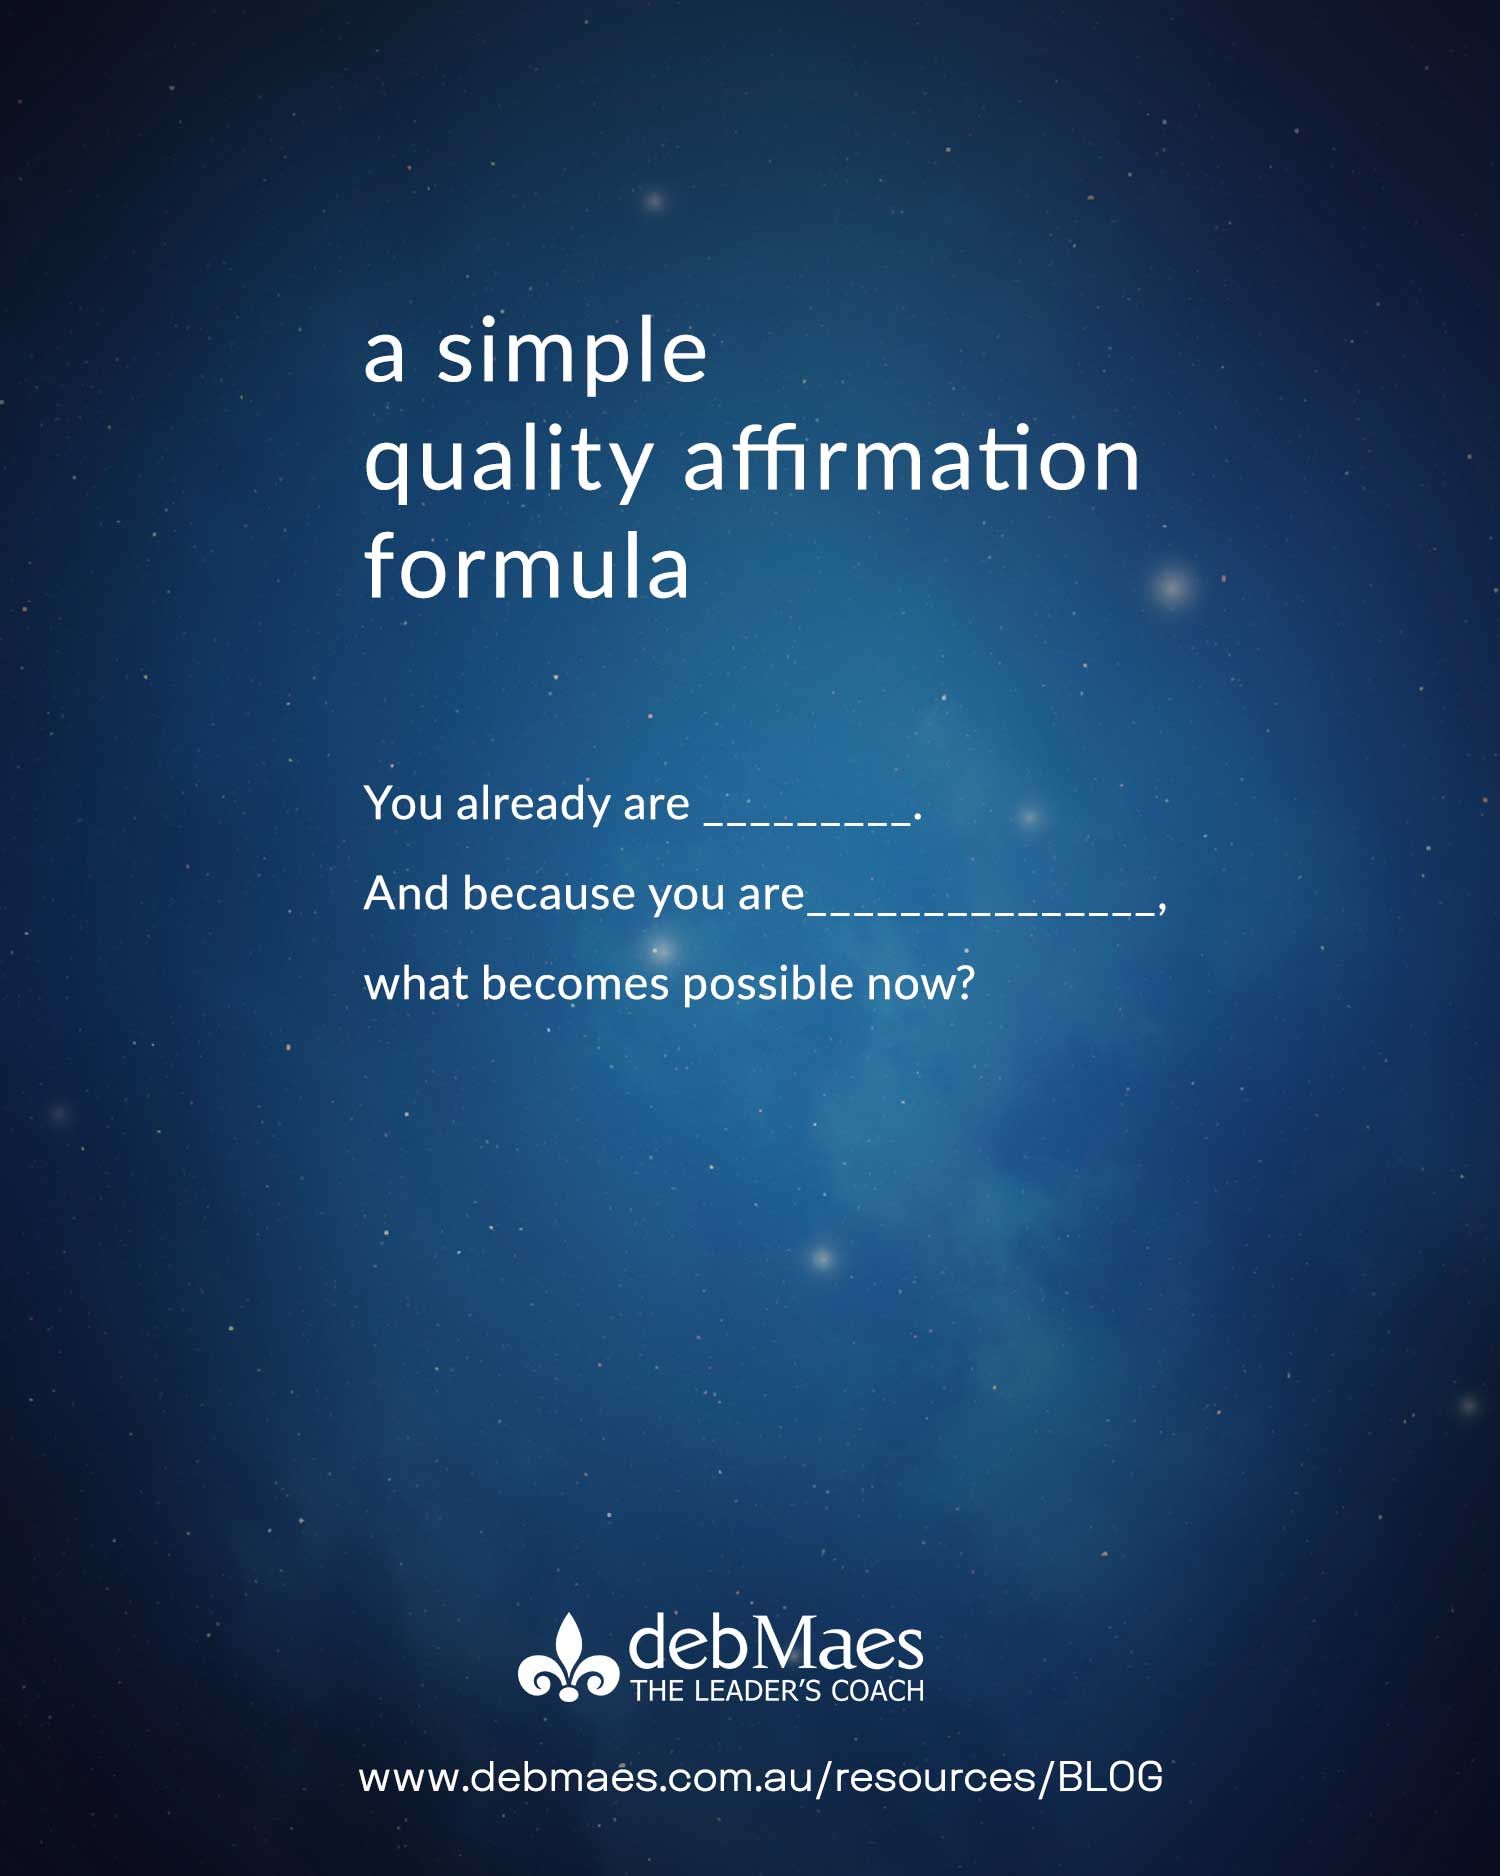 Your affirmations aren’t fooling anyone